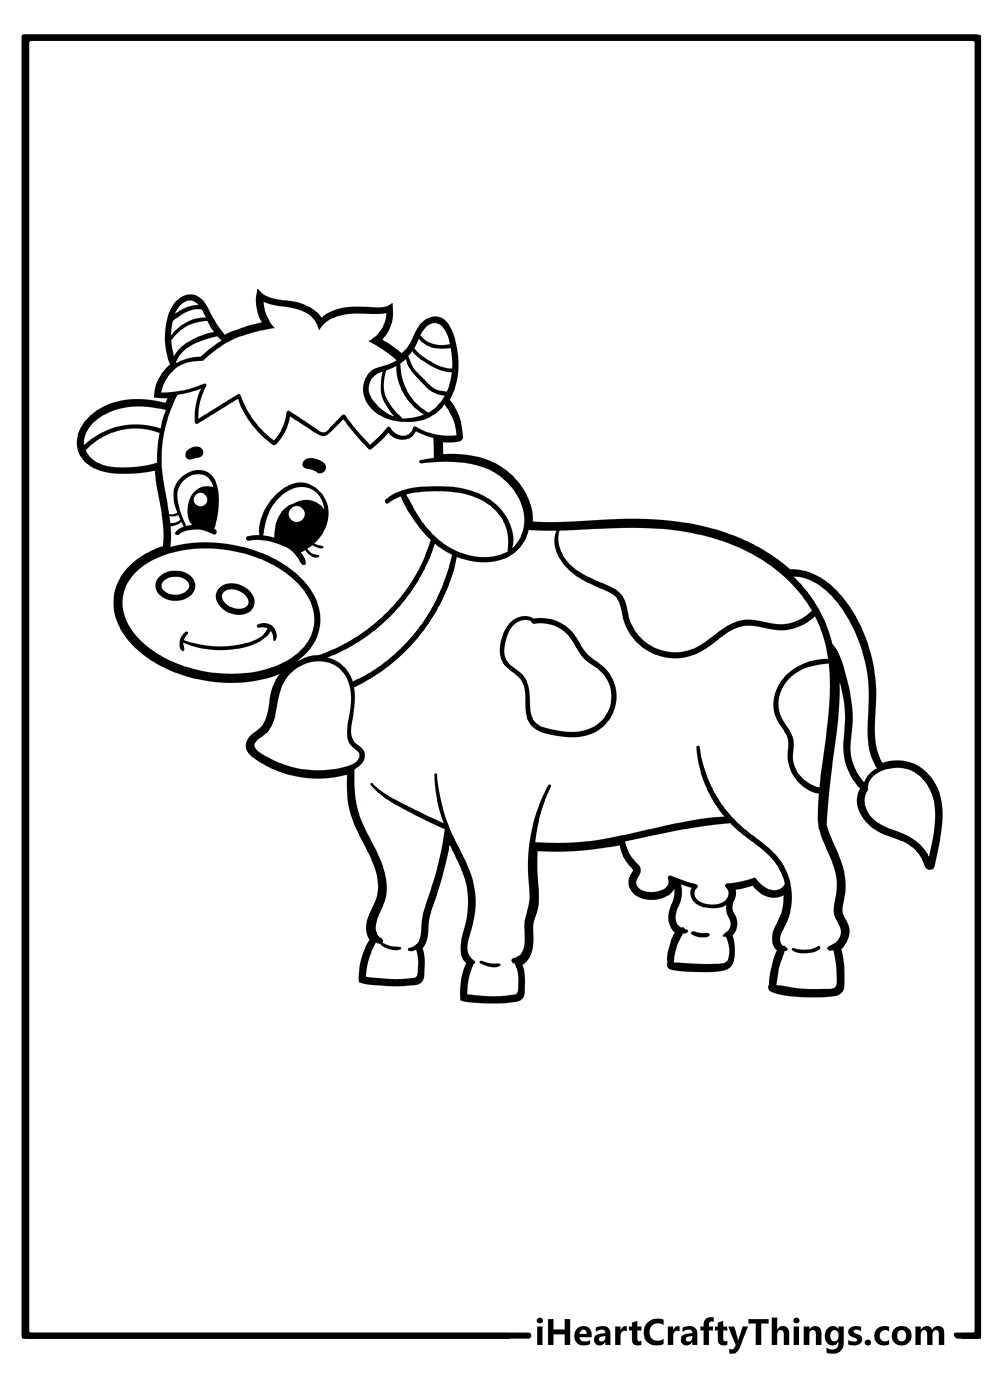 Cow Coloring Pages 100 Free Printables - Coloring Pages of Cows Free Printable